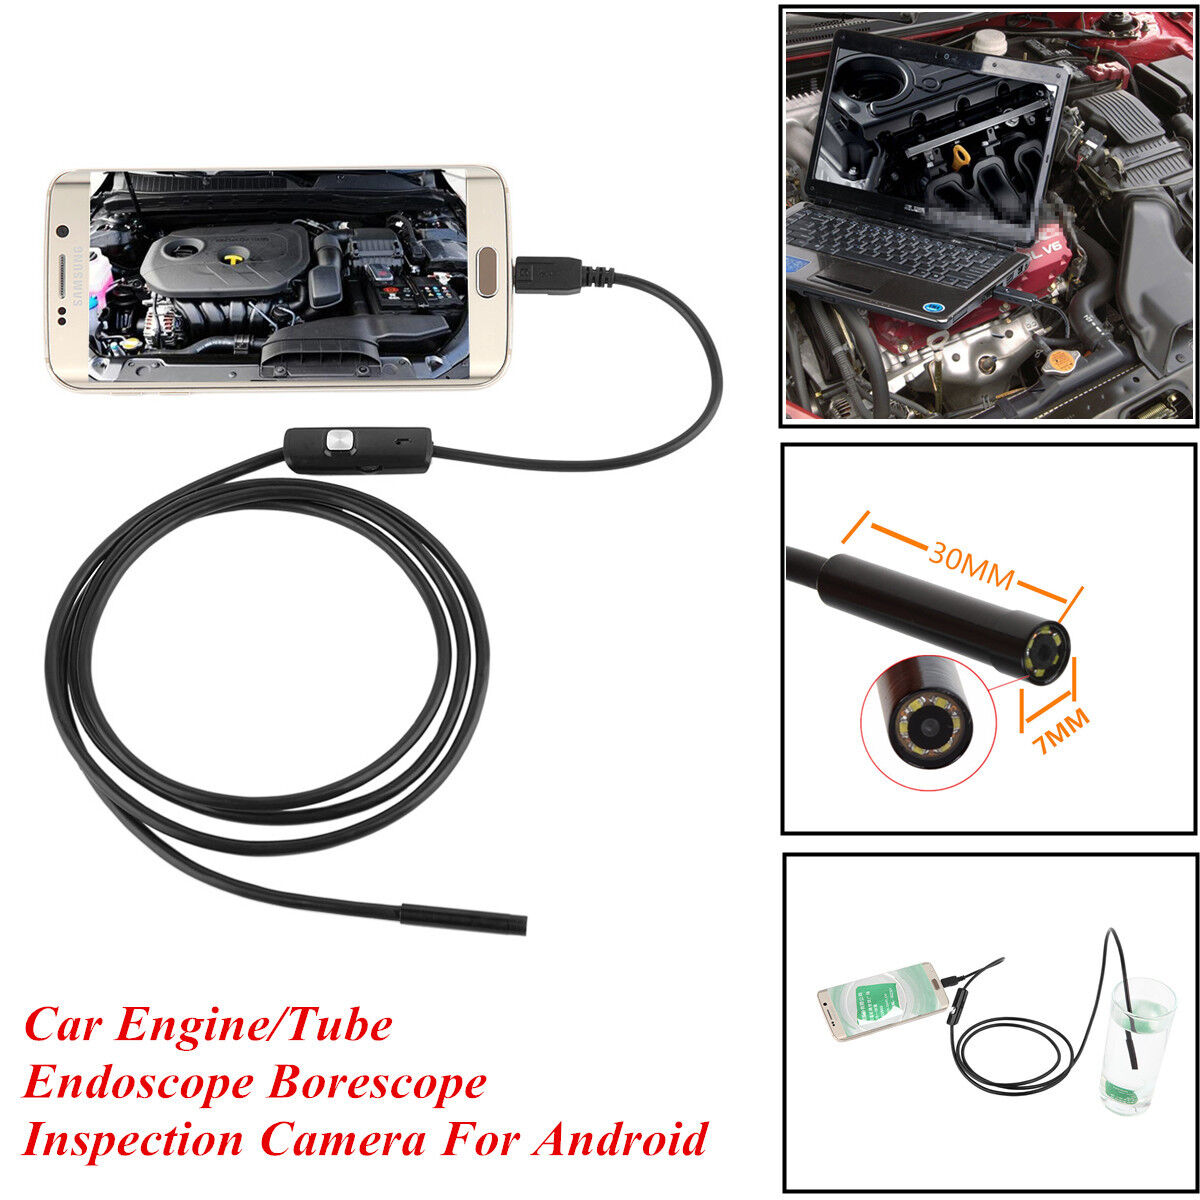 Car Engine Oil Pump Waterproof Endoscope Borescope Inspection Camera For Android